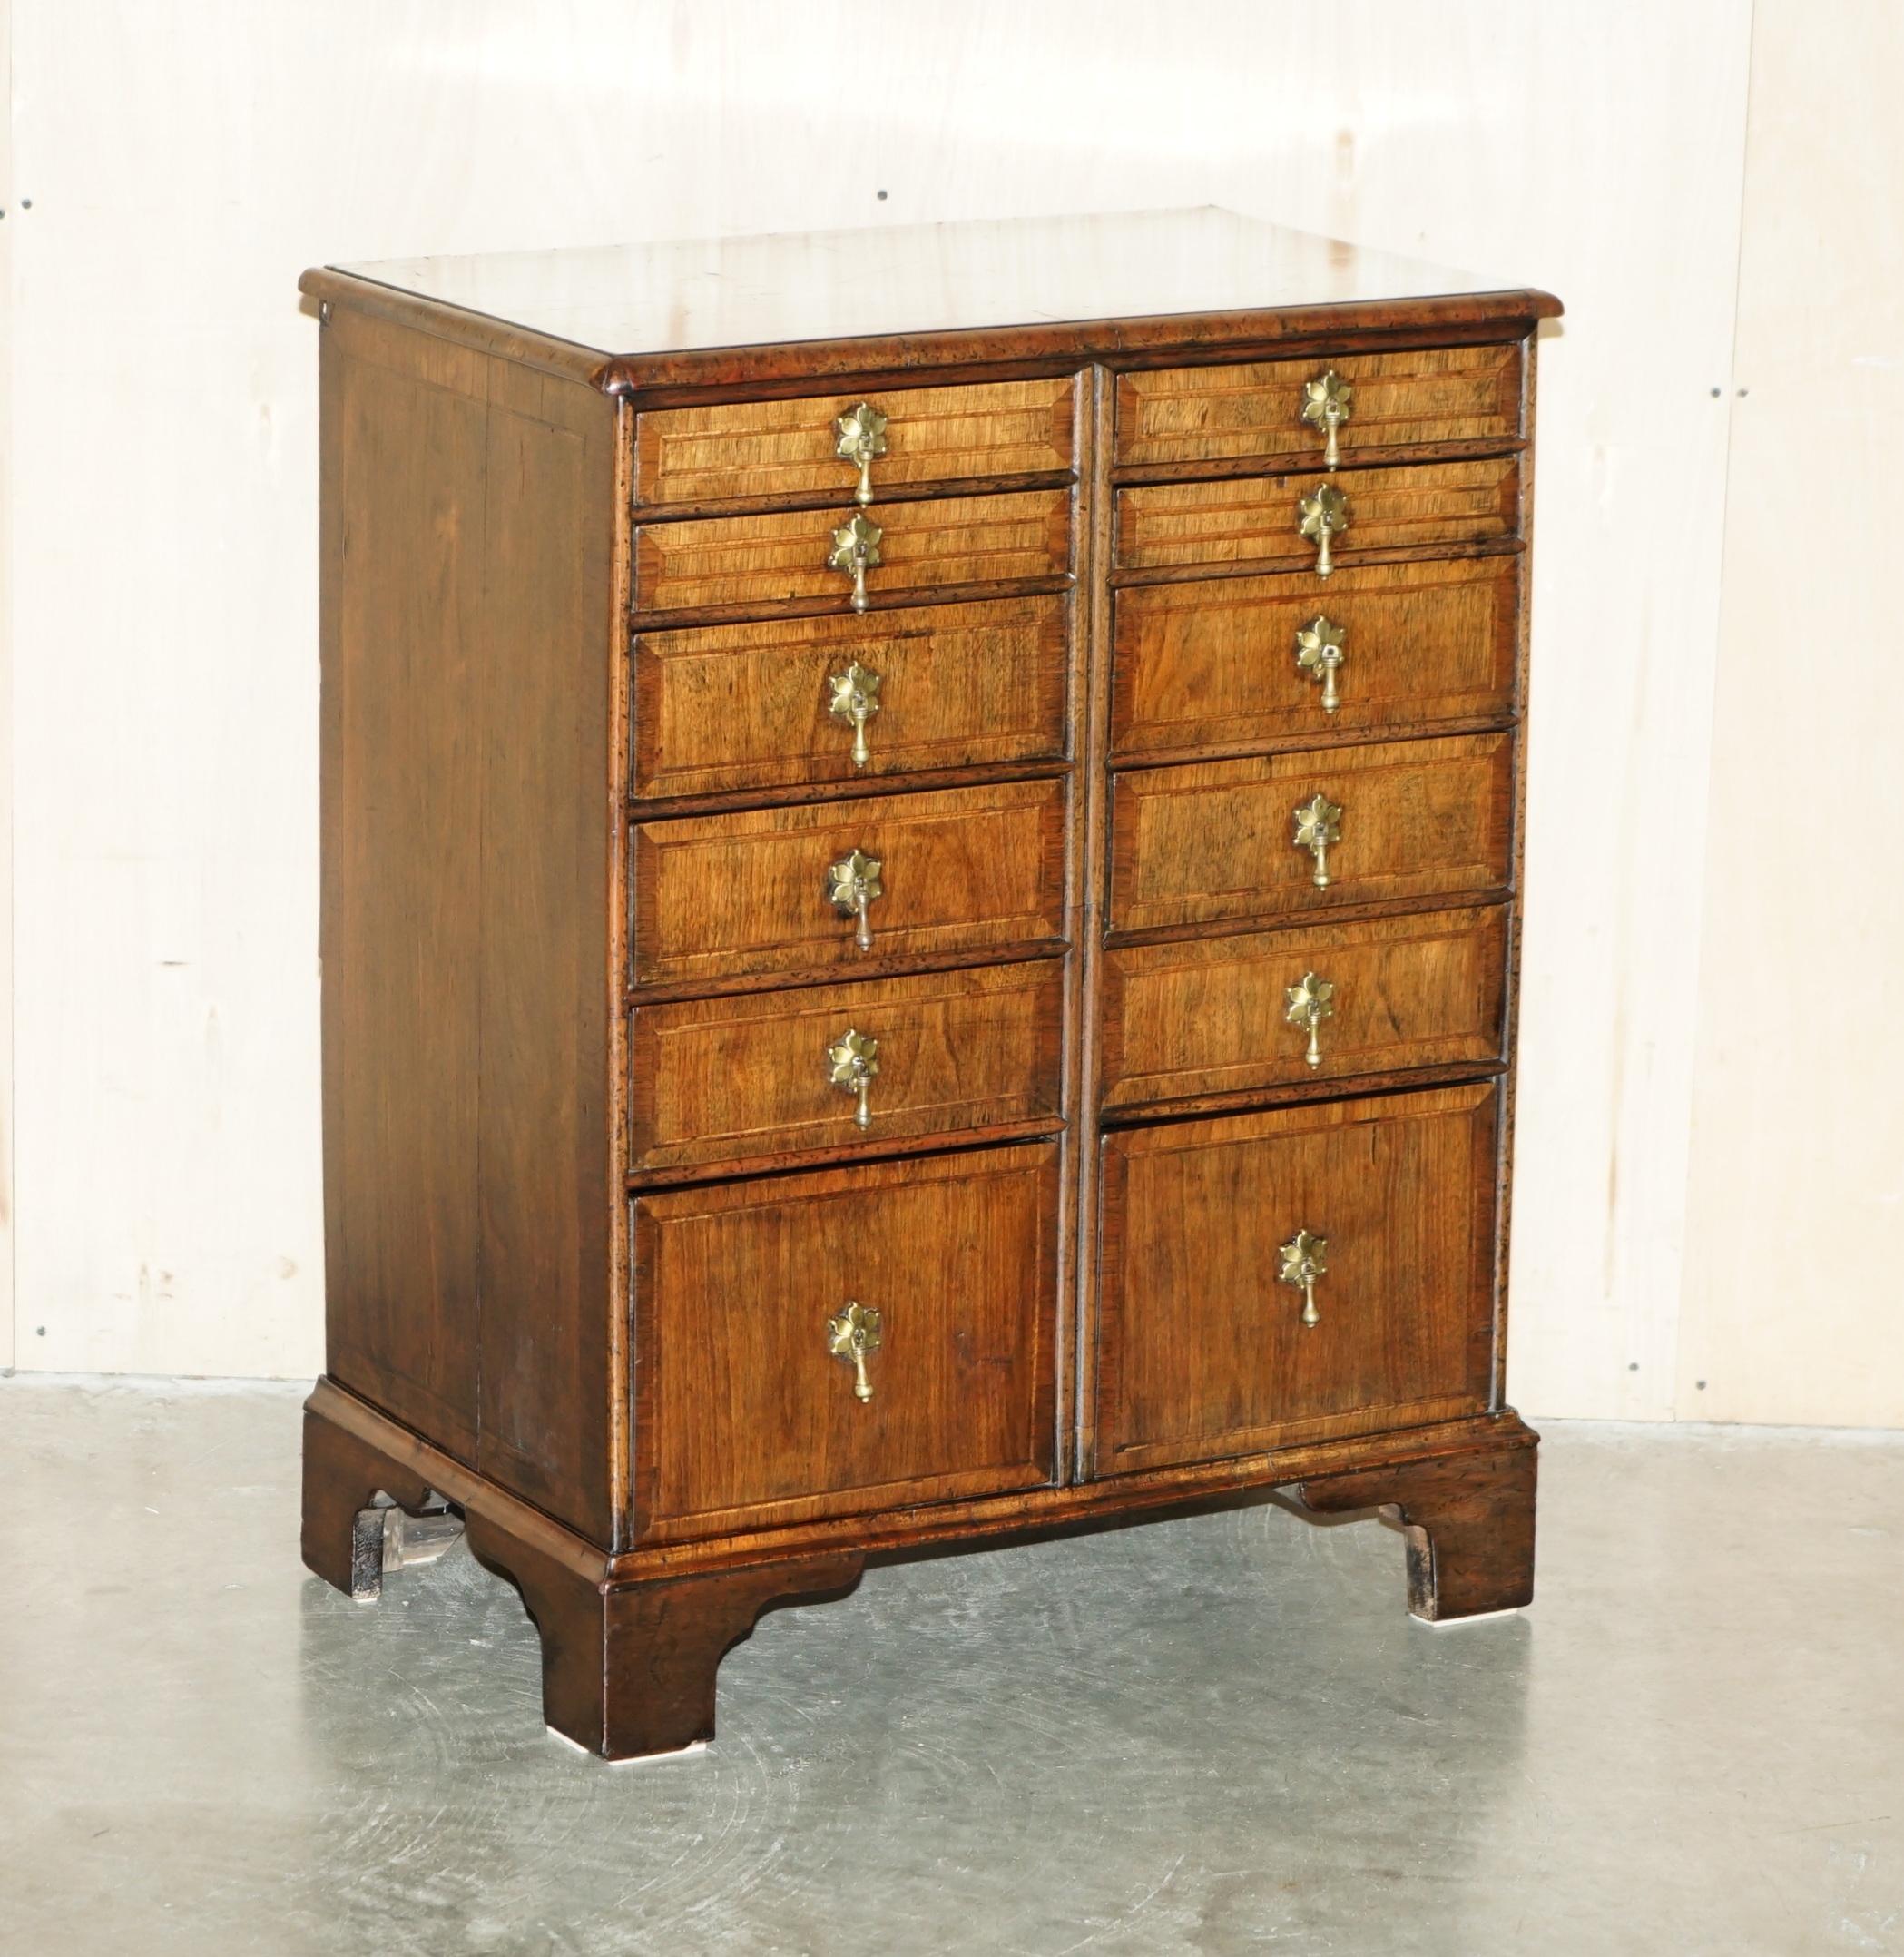 Royal House Antiques

Royal House Antiques is delighted to offer for sale this absolutely sublime George III circa 1760 Burr Walnut bank of drawers 

Please note the delivery fee listed is just a guide, it covers within the M25 only for the UK and